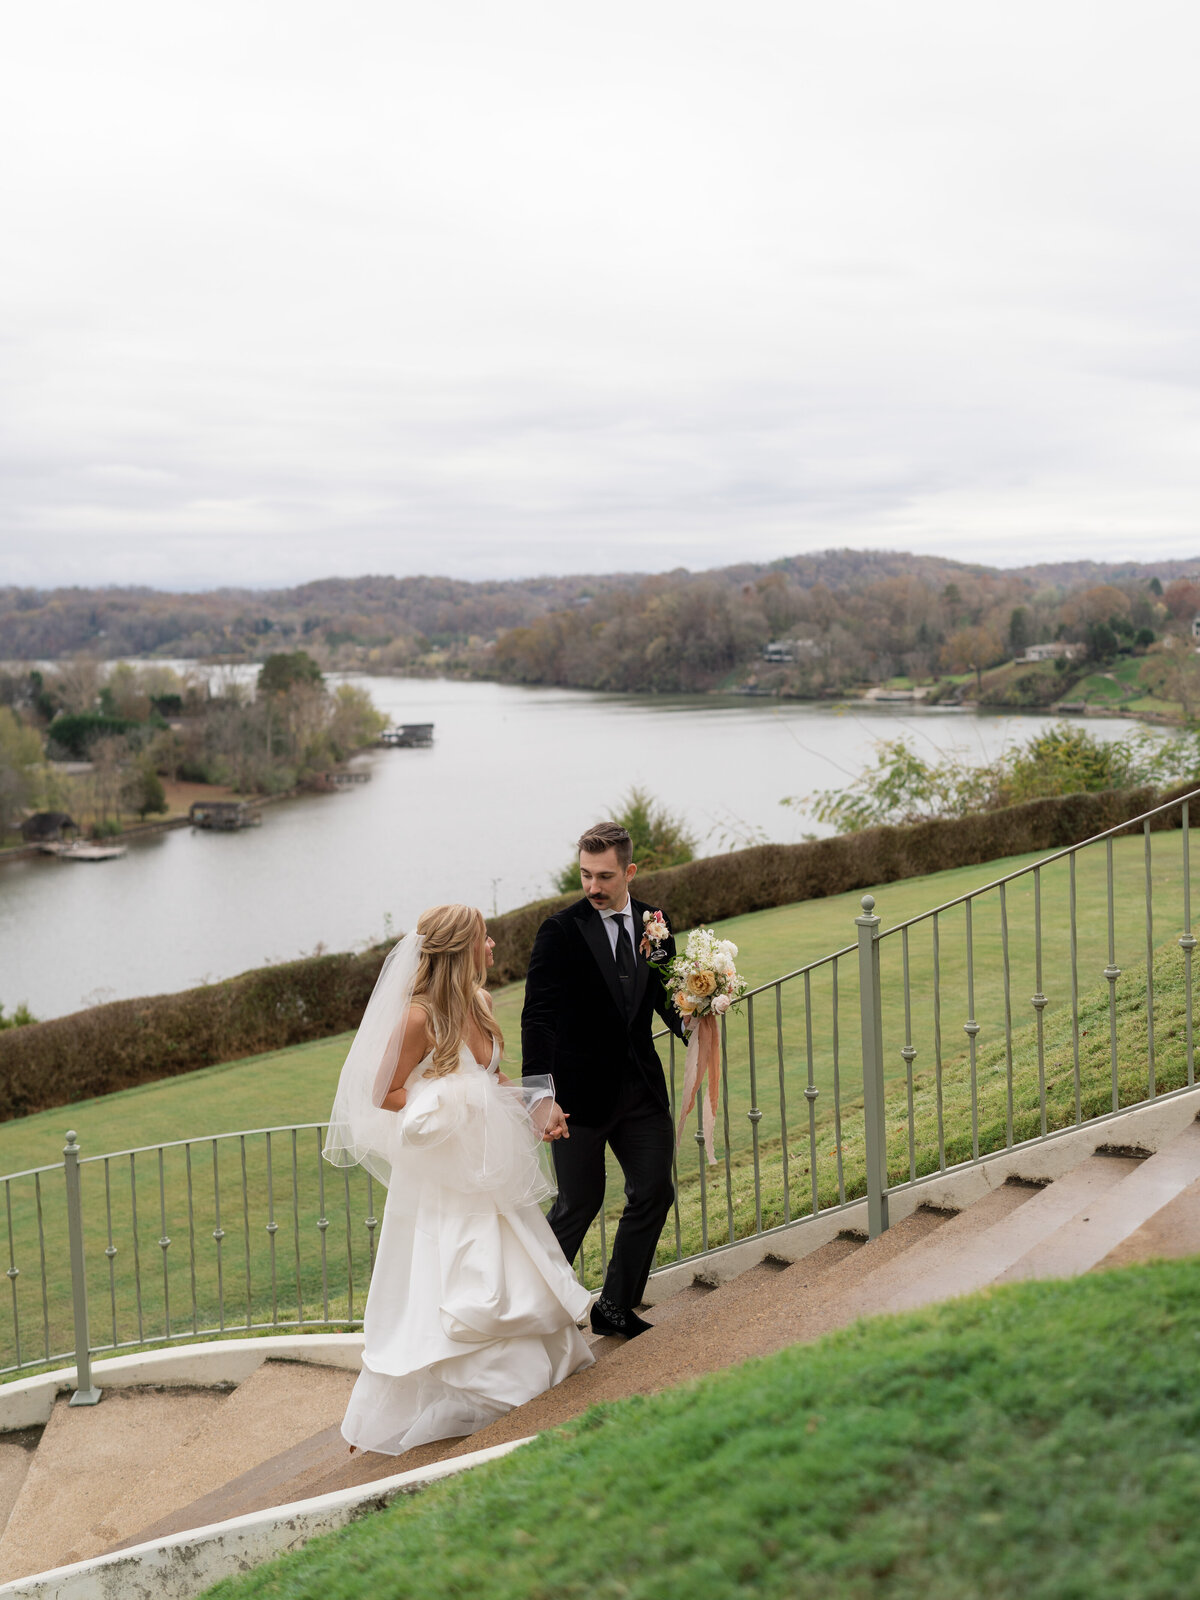 Whitney Bowman Events Knoxville Tennessee Wedding Planner Planning Destination Southern Weddings Florida 30A Alabama Luxury Event Destination Weddings MaggieSpencerWedding_Knoxville_2022_@benfinch_FinchPhoto-301